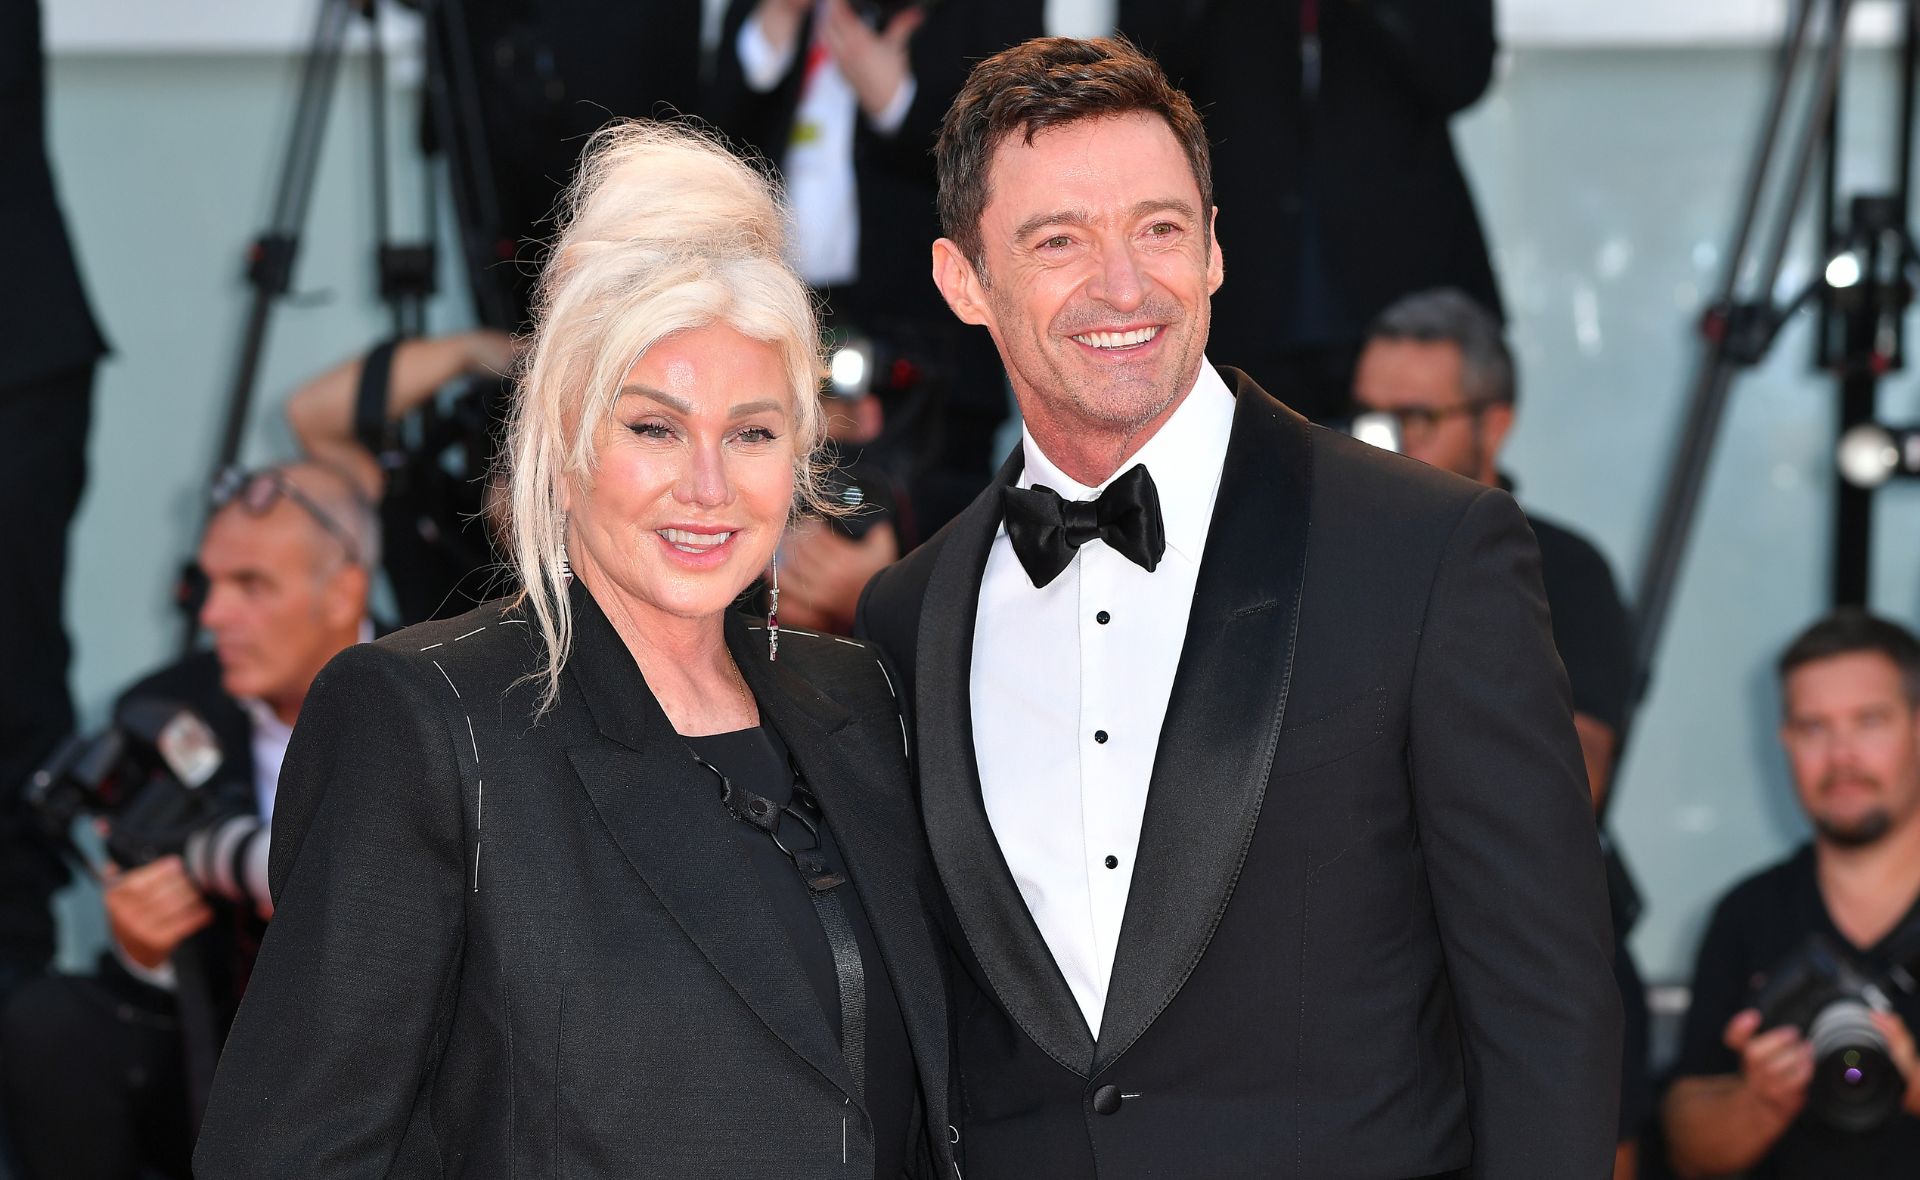 Hugh Jackman wants to ‘shield’ his children after his own troubling childhood